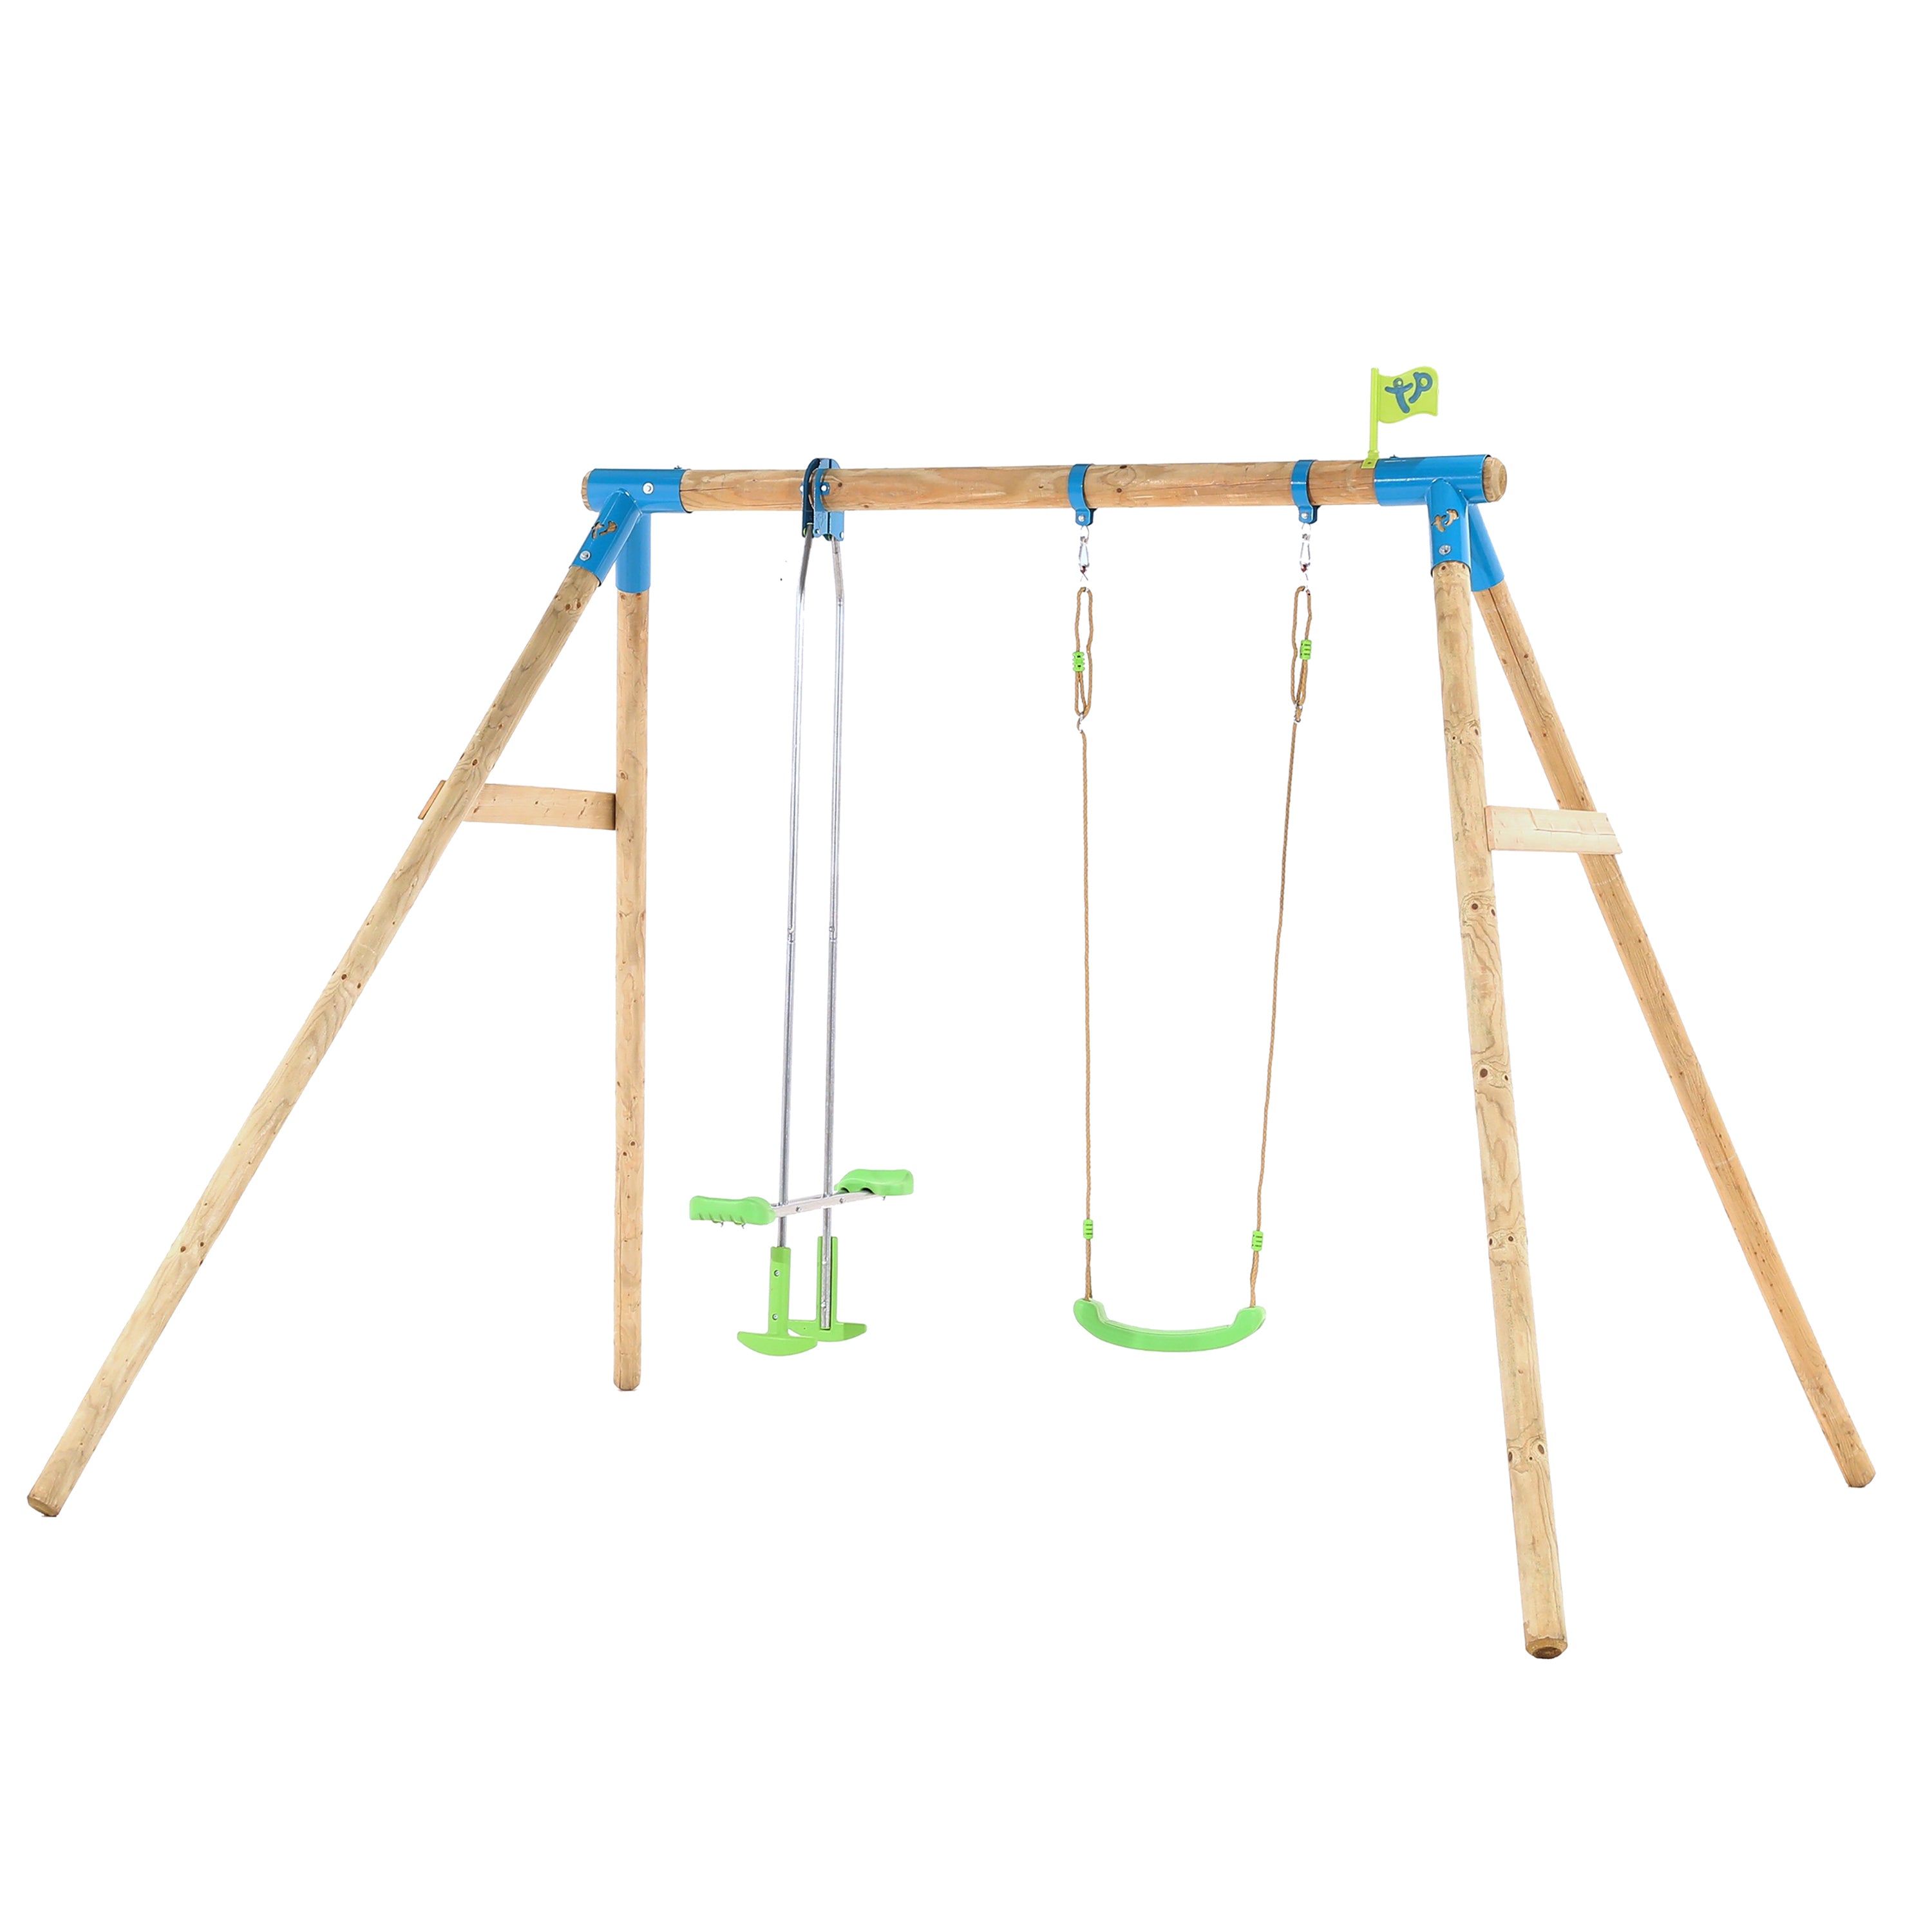 TP Knightswood Double Wooden Swing Set With Glide Ride - FSC<sup>®</sup> certified